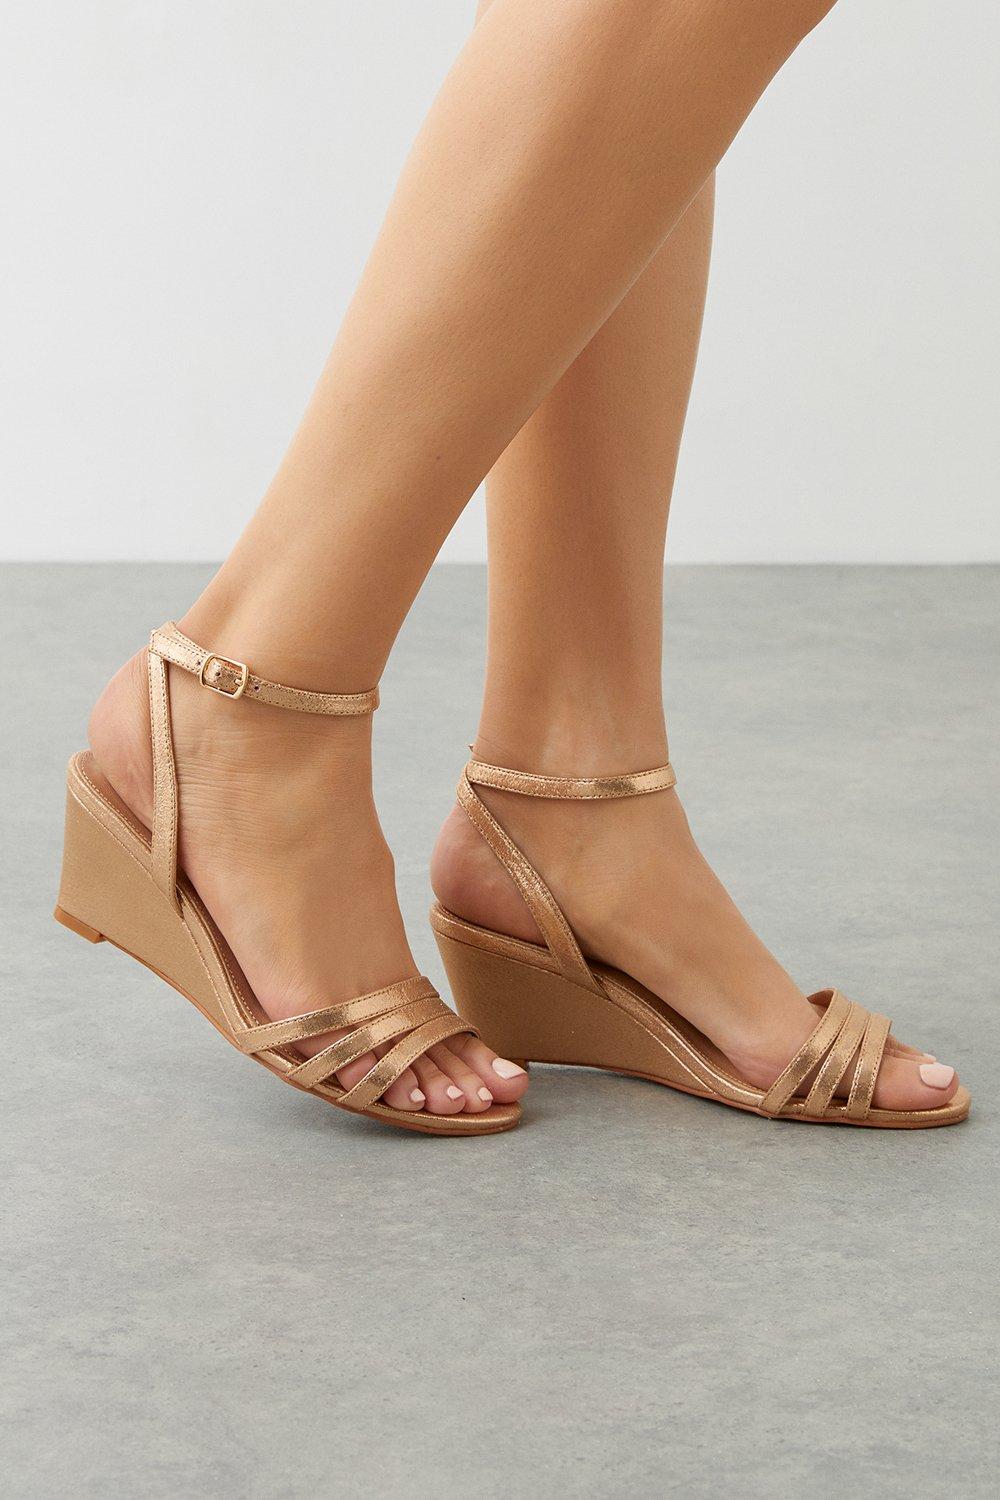 Women’s Good For The Sole: Wide Fit Angelina Wedge Heel Sandals - rose gold - 4